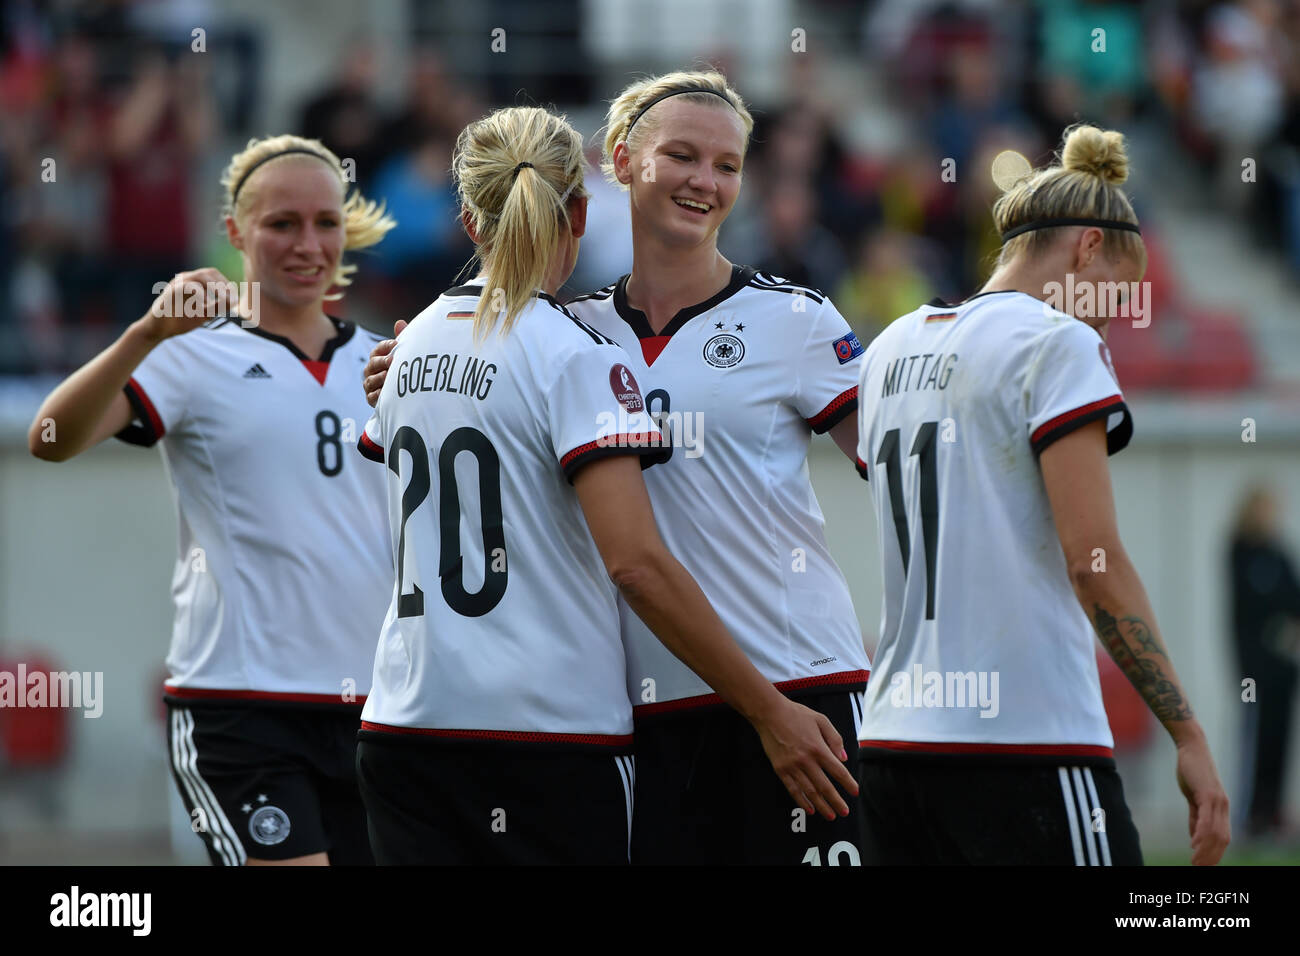 Women's Soccer European Championships Qualifications: Germany vs Hungary at the Erdgas Sportpark in Halle (Saale), Germany, 18 Septemeber 2015. Germany's (l-r) Pauline Bremer, Lena Goeßling, Alexandra Popp and Anja Mittag celebrate their win. Photo: HENDRIK SCHMIDT/DPA Stock Photo